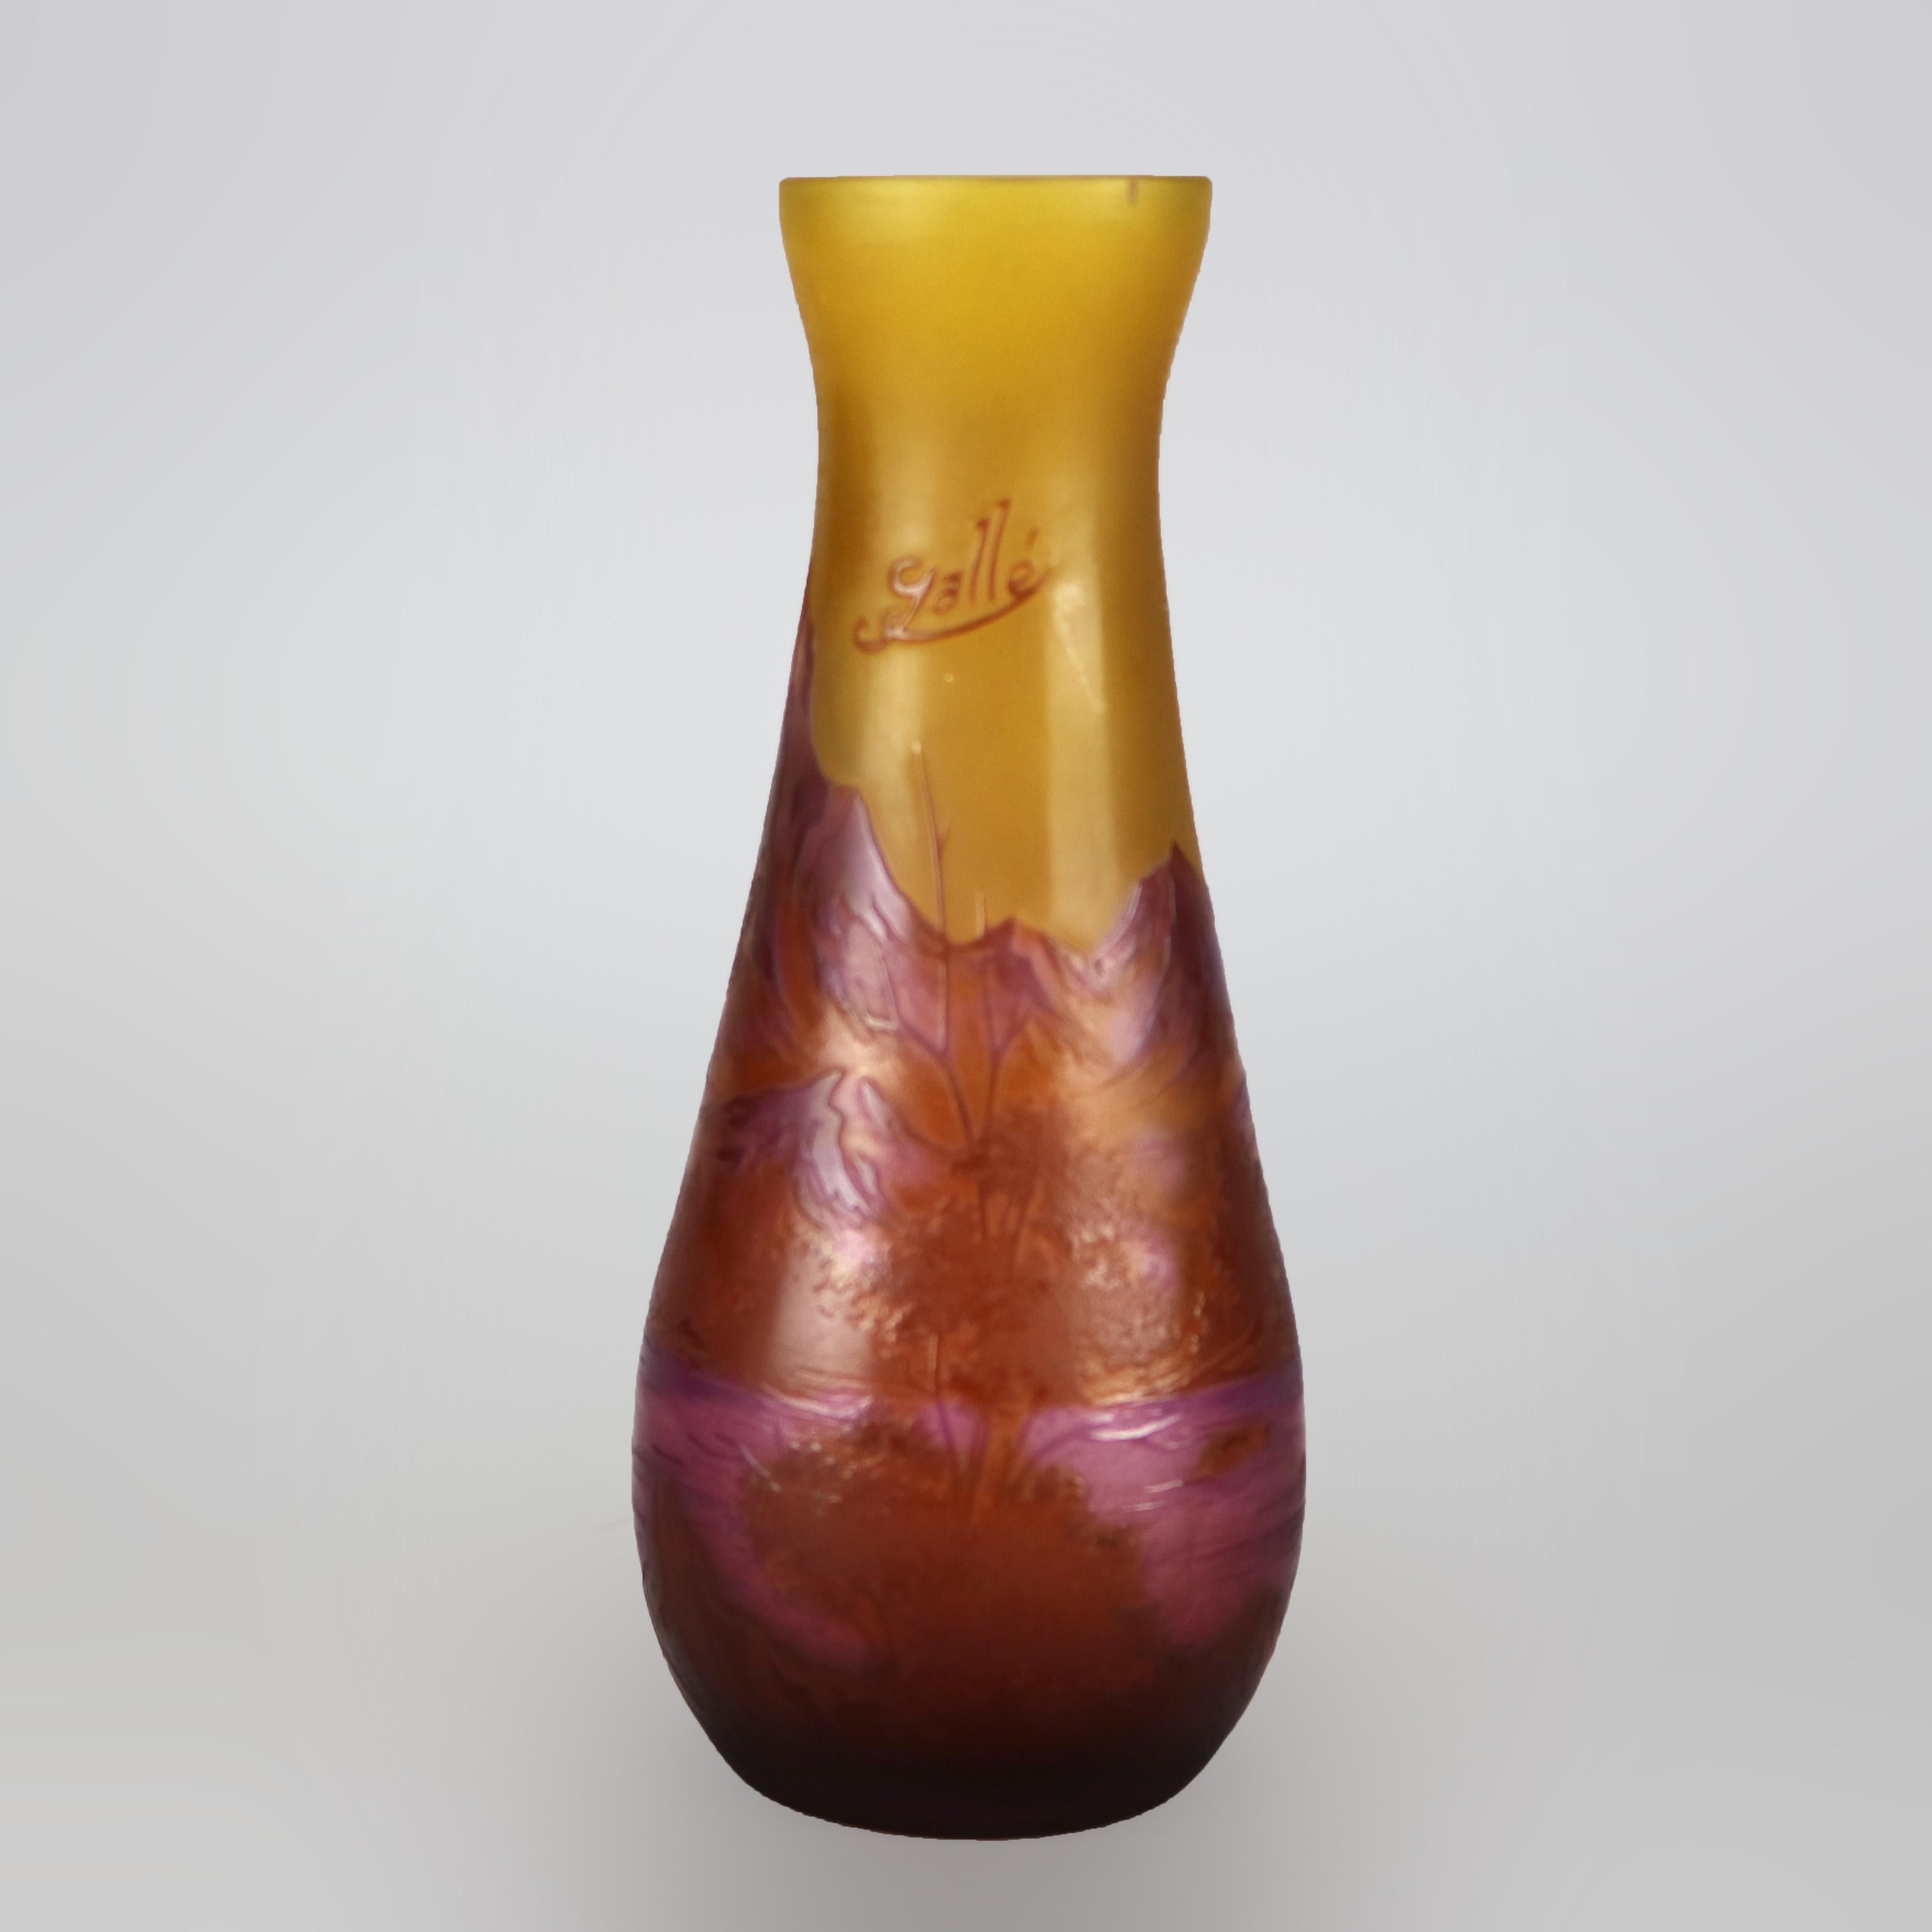 An antique French Galle vase offers cameo art glass construction with cut-back mountainous river landscape scene signed as photographed, c1900

Measures - 6.25''H x 2.75''W x 2.75''D.